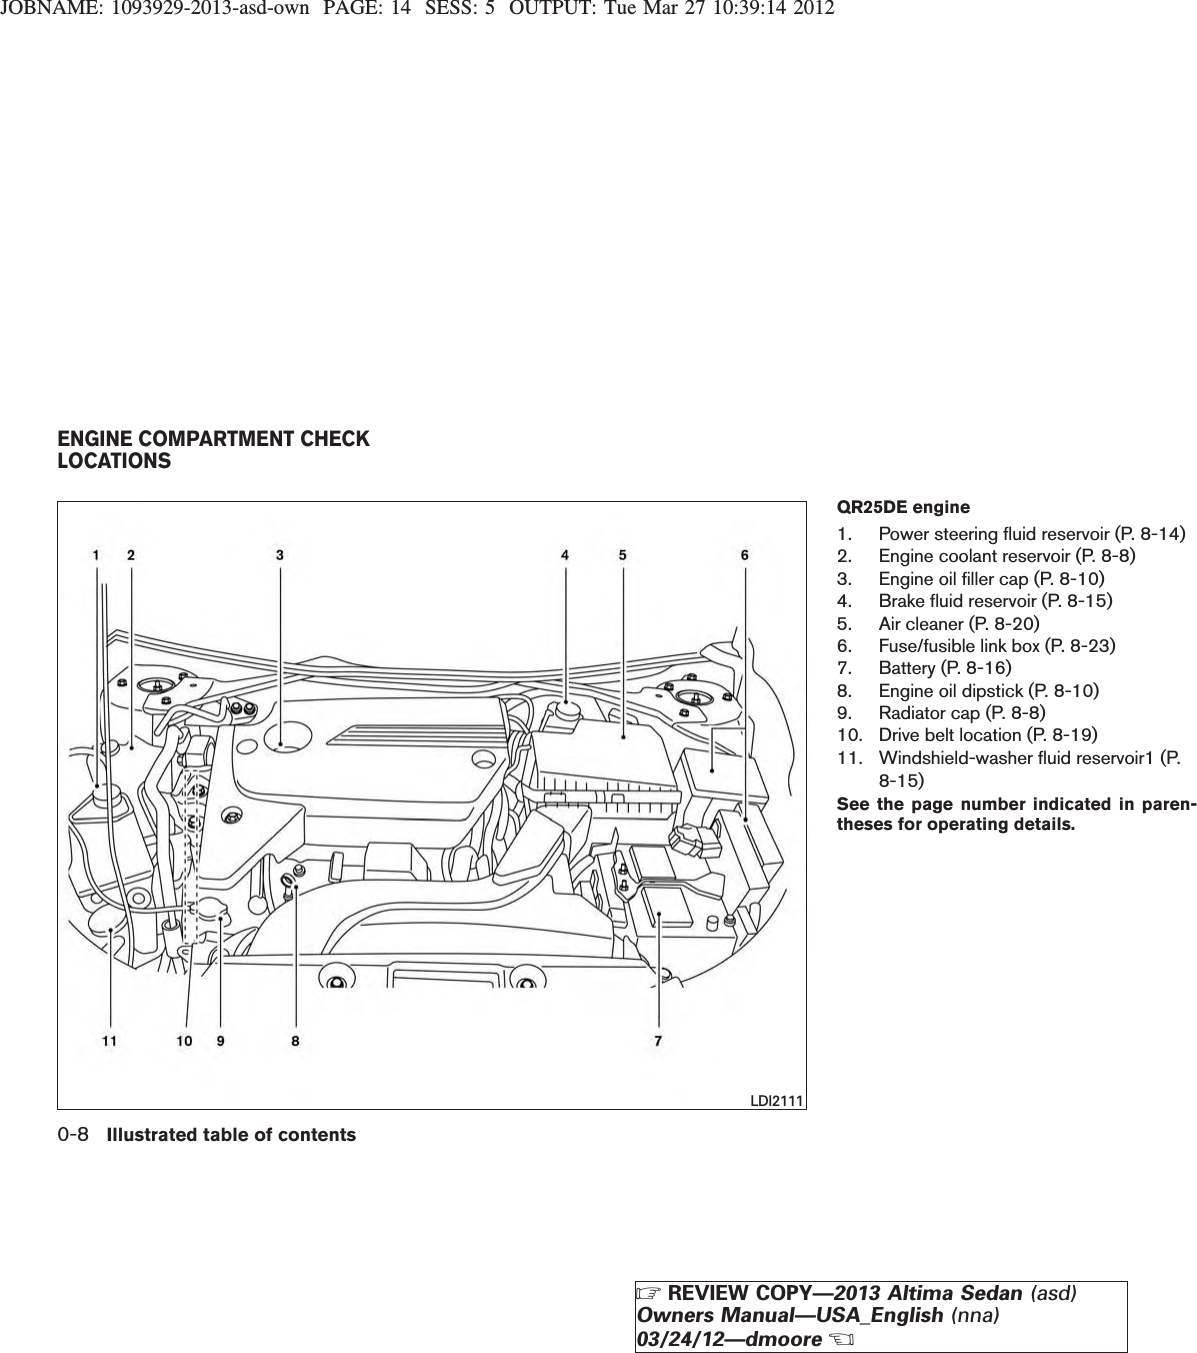 JOBNAME: 1093929-2013-asd-own PAGE: 14 SESS: 5 OUTPUT: Tue Mar 27 10:39:14 2012QR25DE engine1. Power steering fluid reservoir (P. 8-14)2. Engine coolant reservoir (P. 8-8)3. Engine oil filler cap (P. 8-10)4. Brake fluid reservoir (P. 8-15)5. Air cleaner (P. 8-20)6. Fuse/fusible link box (P. 8-23)7. Battery (P. 8-16)8. Engine oil dipstick (P. 8-10)9. Radiator cap (P. 8-8)10. Drive belt location (P. 8-19)11. Windshield-washer fluid reservoir1 (P.8-15)See the page number indicated in paren-theses for operating details.LDI2111ENGINE COMPARTMENT CHECKLOCATIONS0-8 Illustrated table of contentsZREVIEW COPY—2013 Altima Sedan (asd)Owners Manual—USA_English (nna)03/24/12—dmooreX